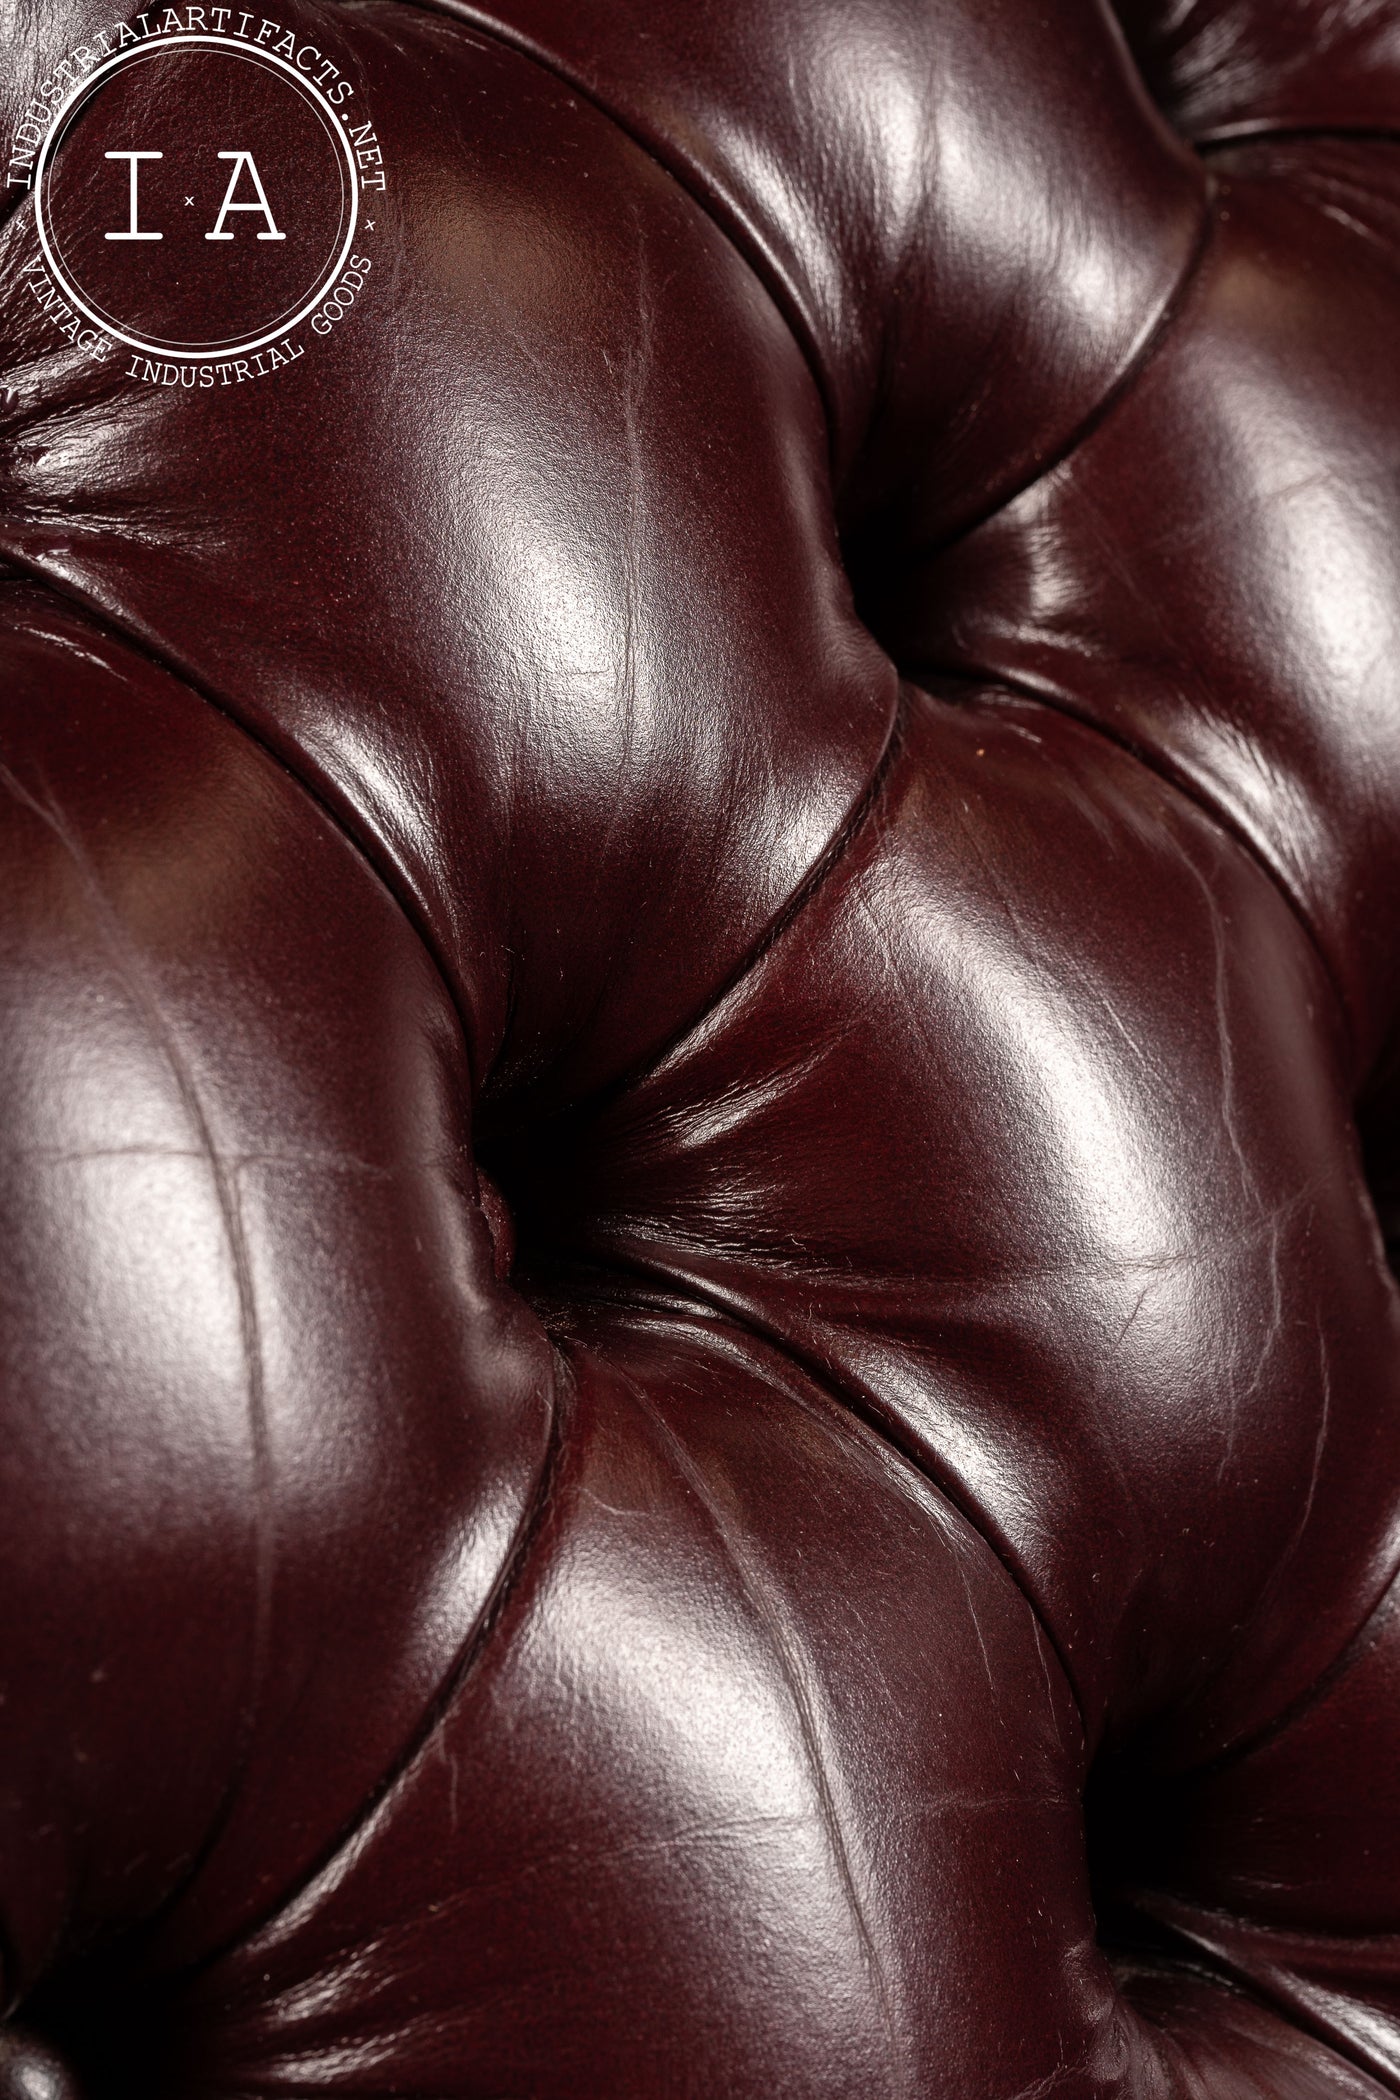 Vintage Tufted Leather Wingback Armchair in Burgundy